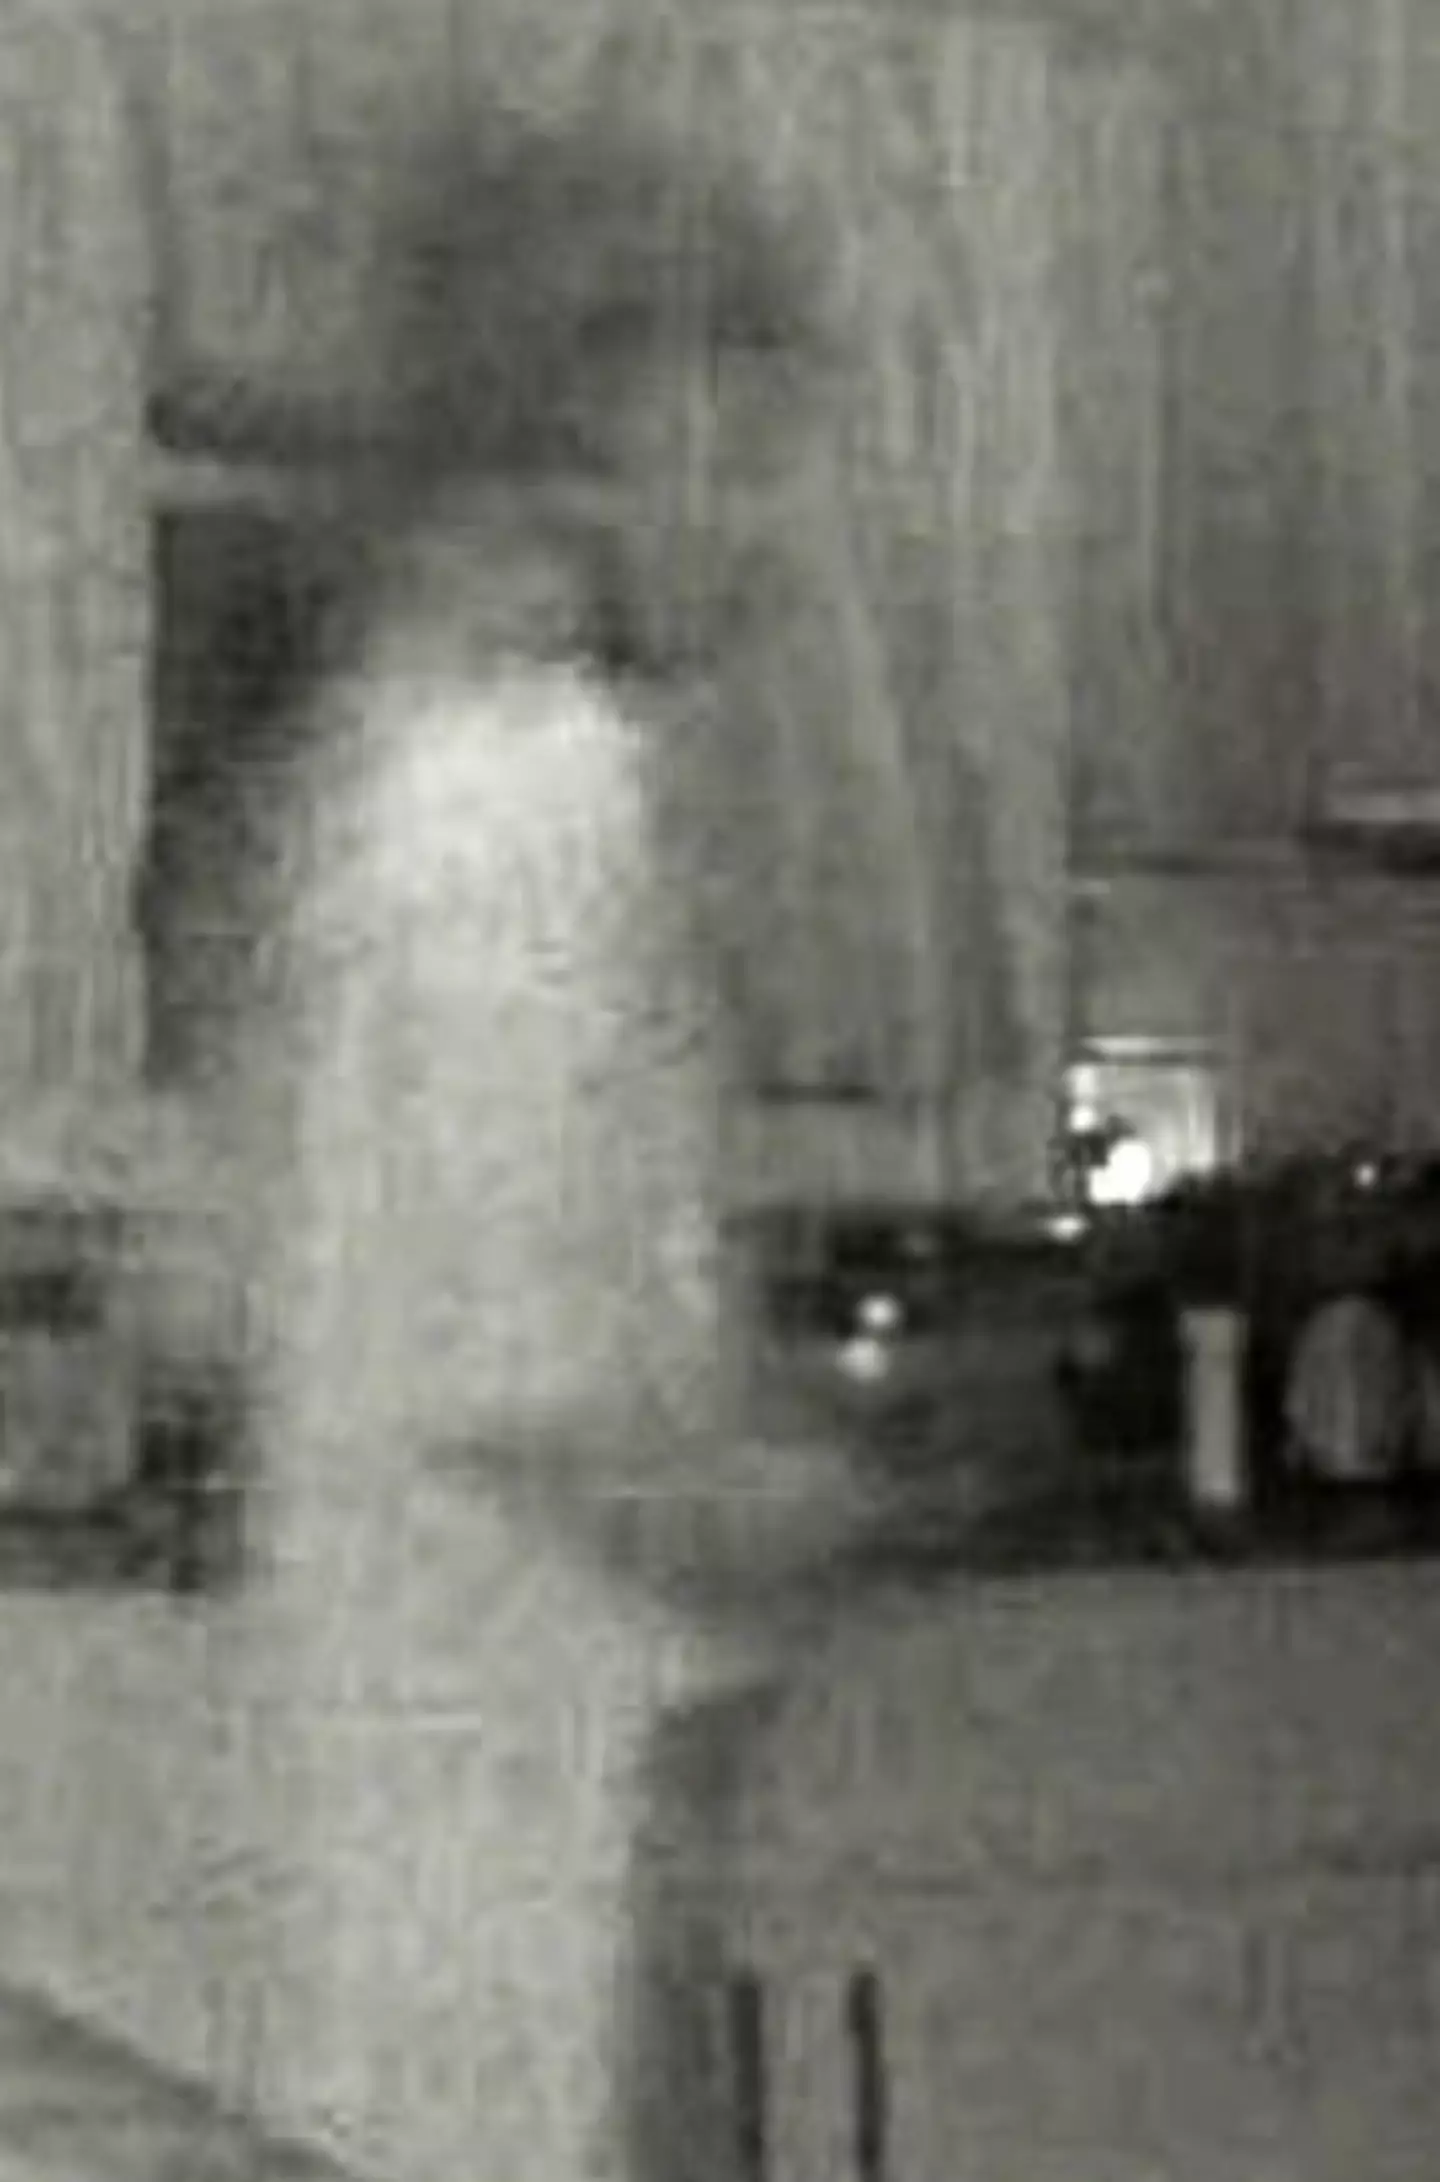 The mum said the alleged ghost looked 'just like' her deceased son.